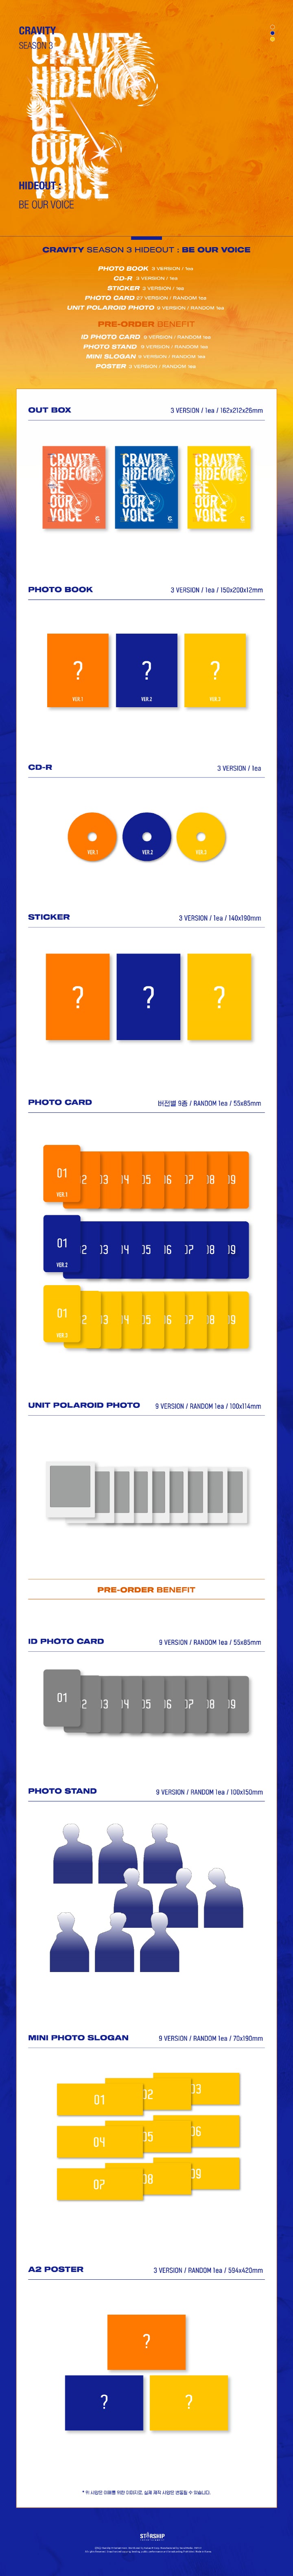 1 CD
1 Photo Book (132 pages)
1 Sticker
1 Polaroid